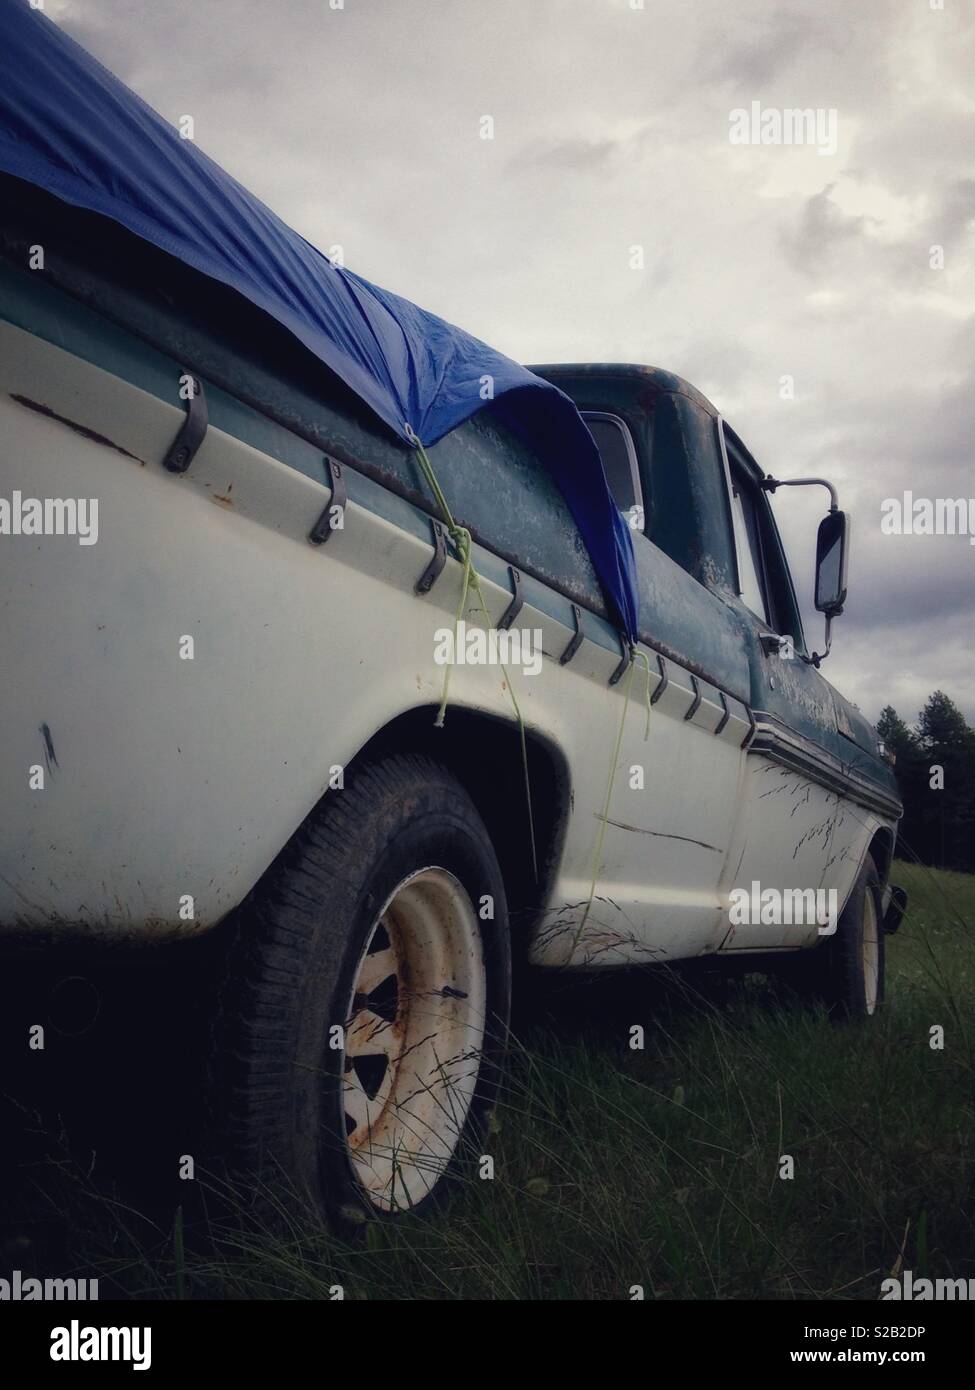 Low angle portrait photo of classic green and white pickup with overcast sky above Stock Photo